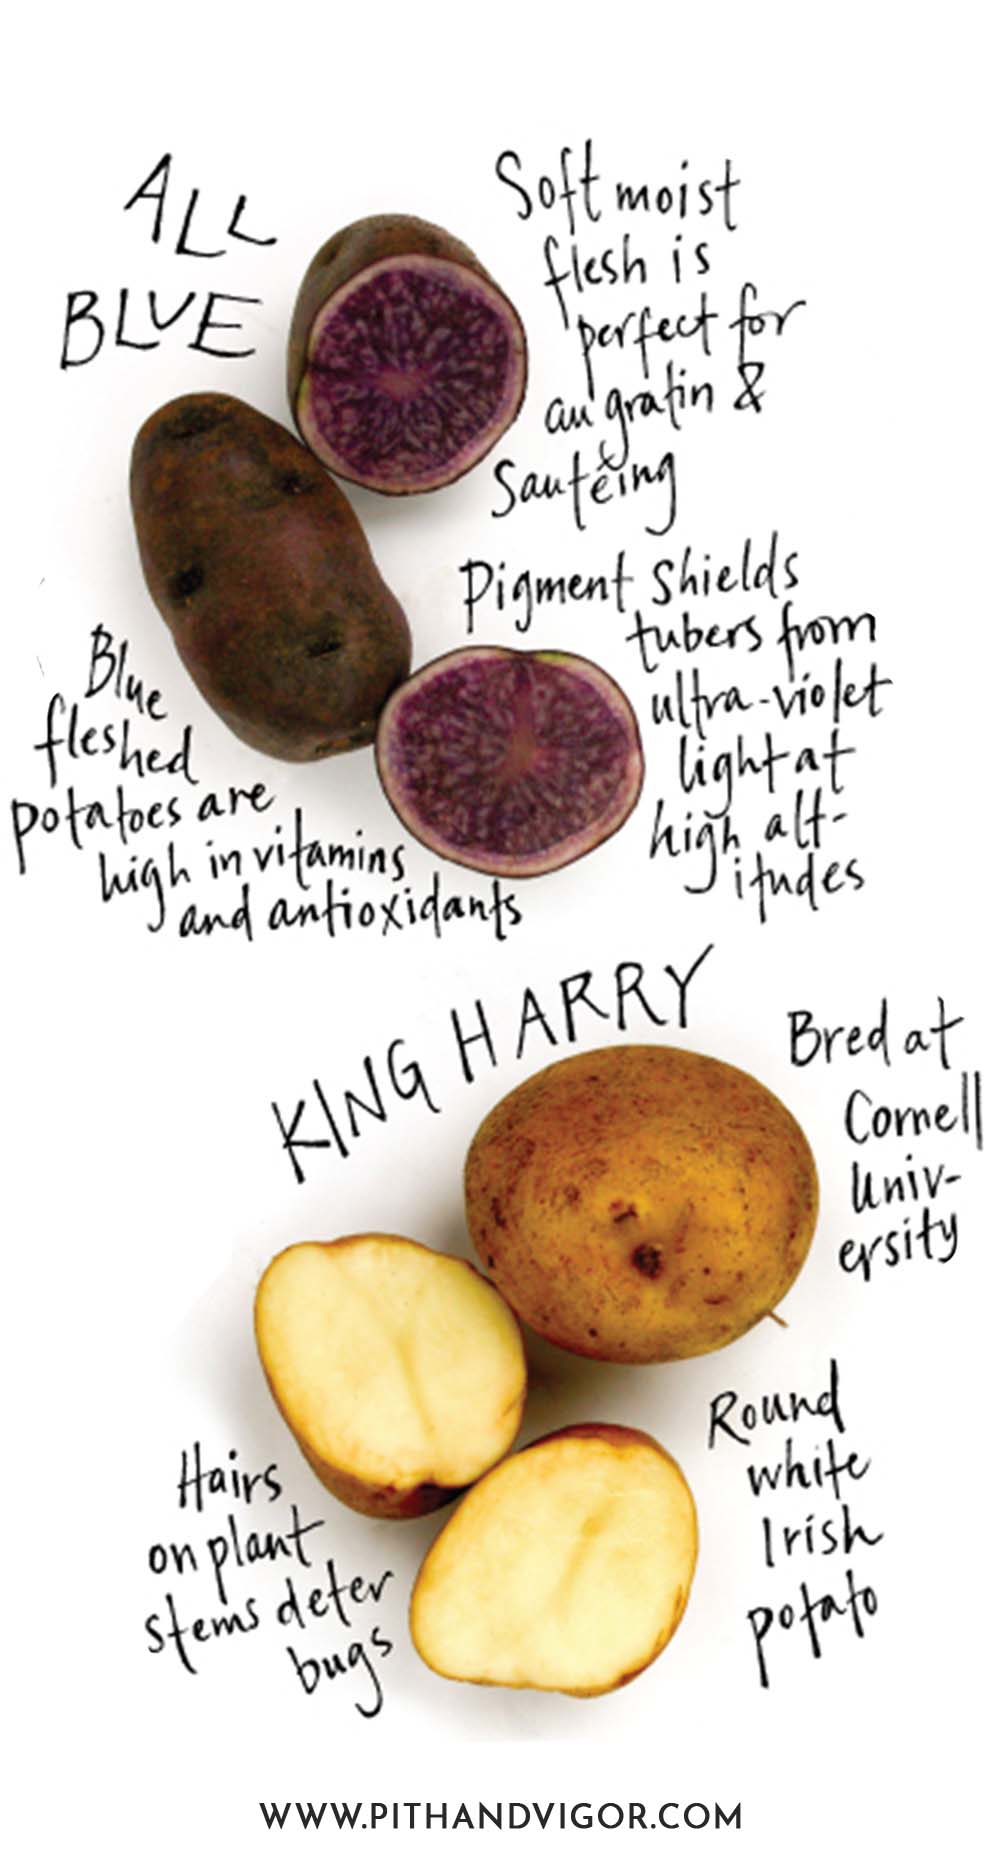 There are many more types of potatoes that can be grown nationwide - but these are some of the varieties that can be grown in the Northern USA (and Canada).illustration of all blue potato and king harry potato features